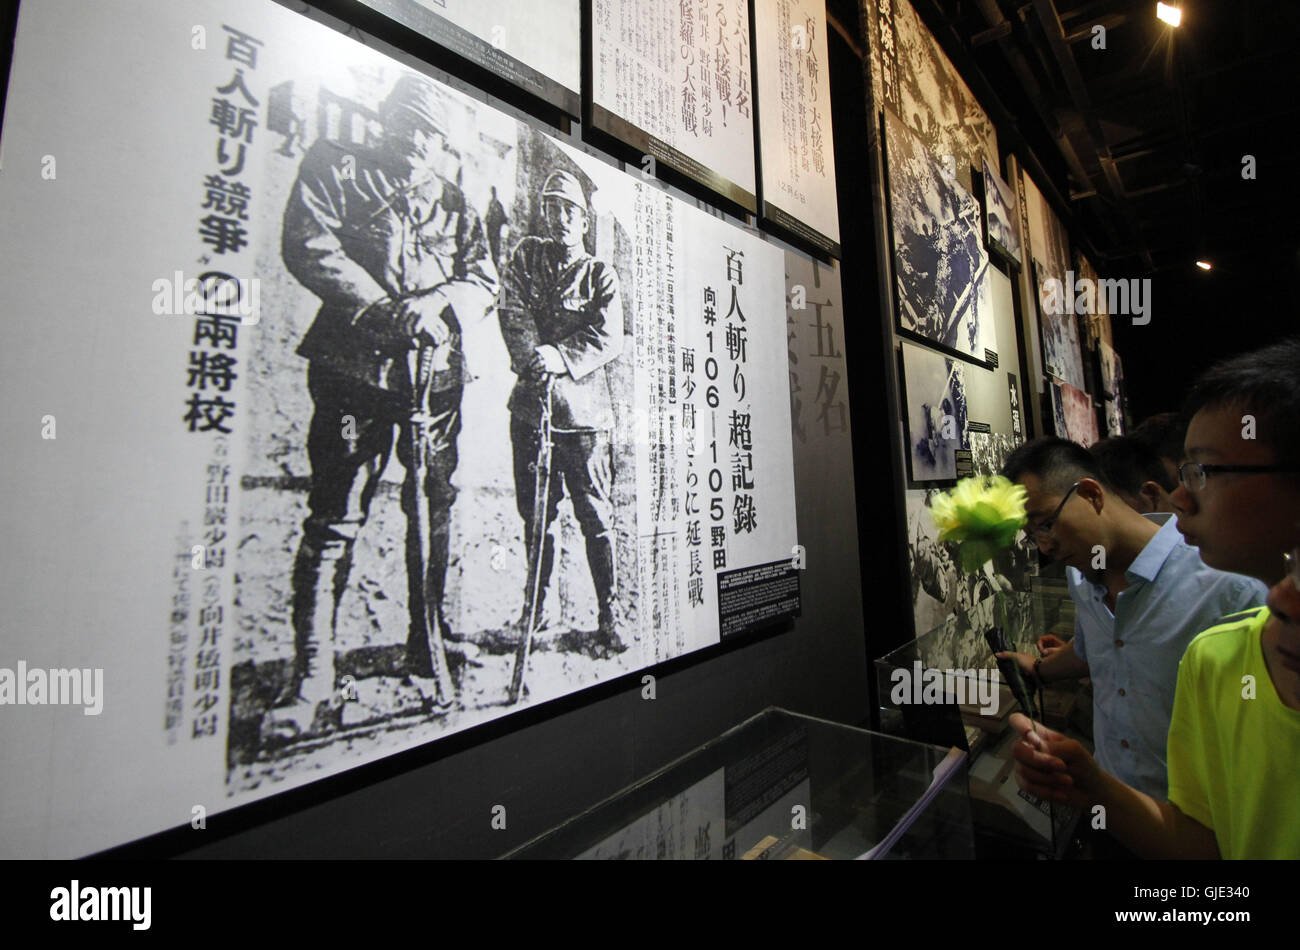 Nanjing, Nanjing, China. 16th Aug, 2016. Nanjing, CHINA - August 6 2016: (EDITORIAL USE ONLY. CHINA OUT) Visitors look at the files and ironclads of Japanese invaders' cruel massacre at Nanjing Massacre VictimsÂ¡Â¯ Memorial Hall. Tomomi Inada, who was appointed as Japanese defense minister, denied the existence of killing competition during the Nanjing Massacre that left an estimated 300,000 people dead in interviews with local media on August 4, 2016. China recently slammed the new Japanese ministerÂ¡Â¯s fault of denying the history and said that Japan should face up to the fact. (Credit I Stock Photo